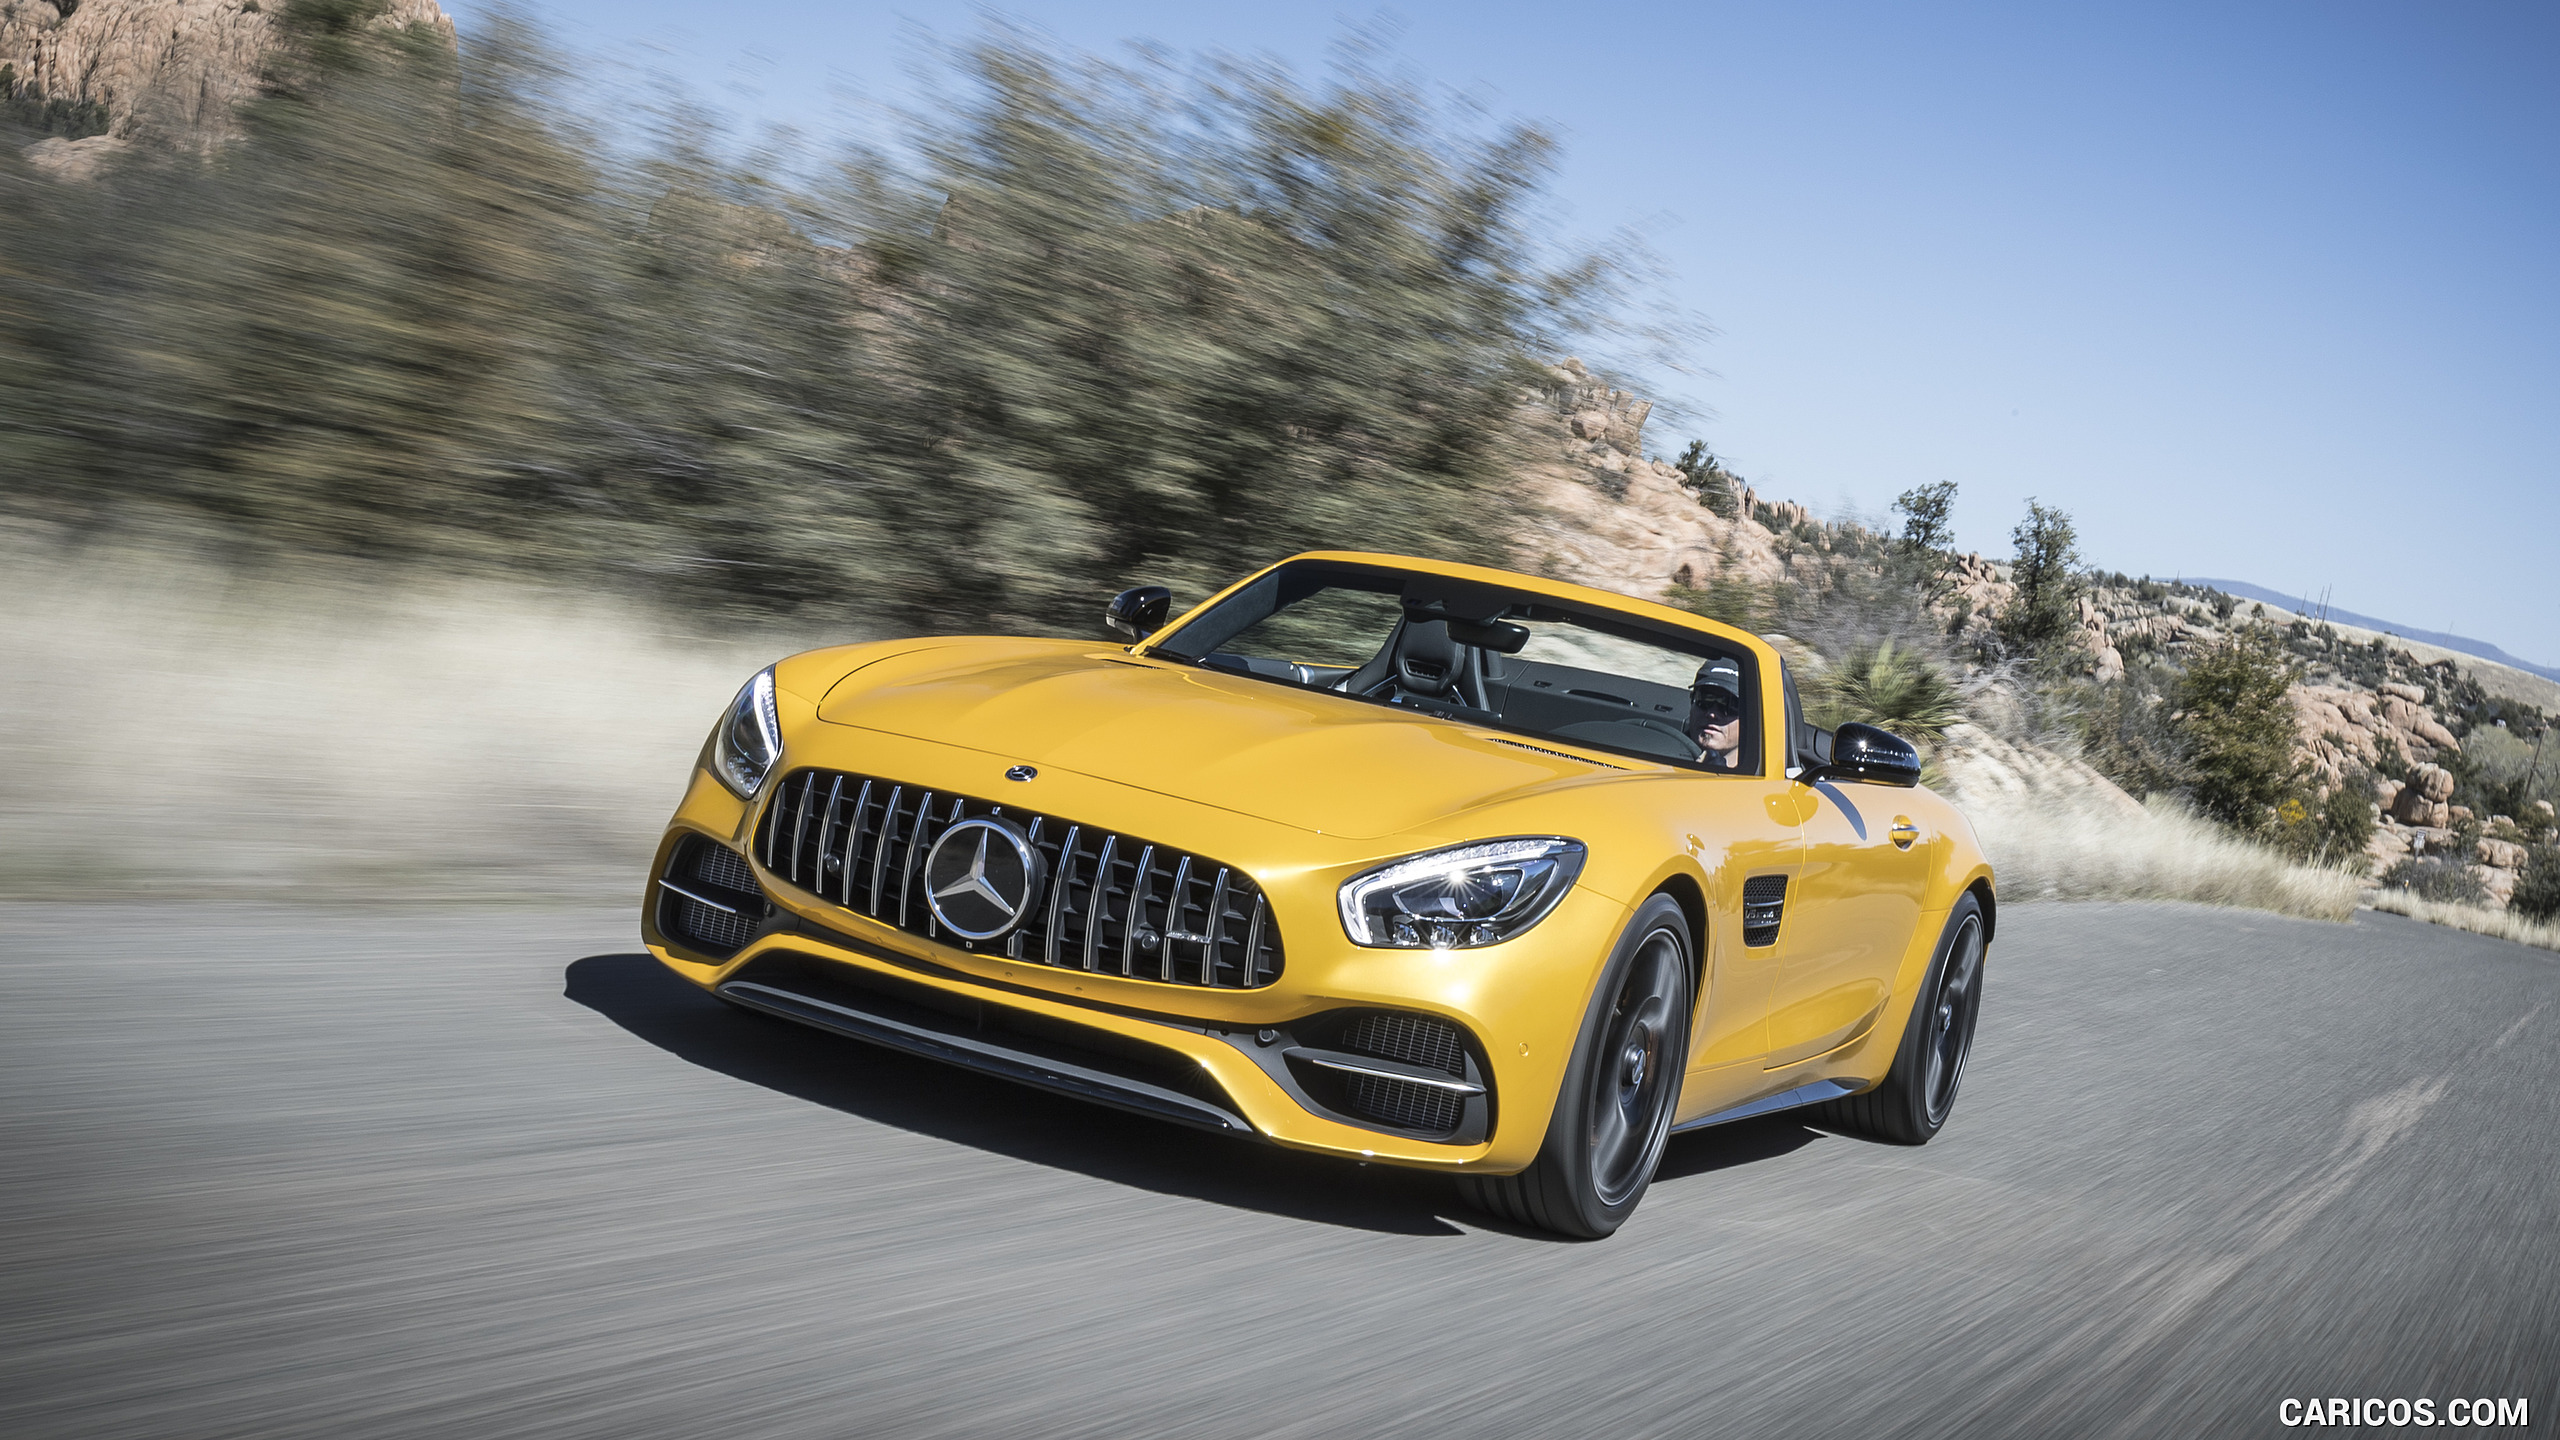 2018 Mercedes-AMG GT C Roadster - Front, #195 of 350